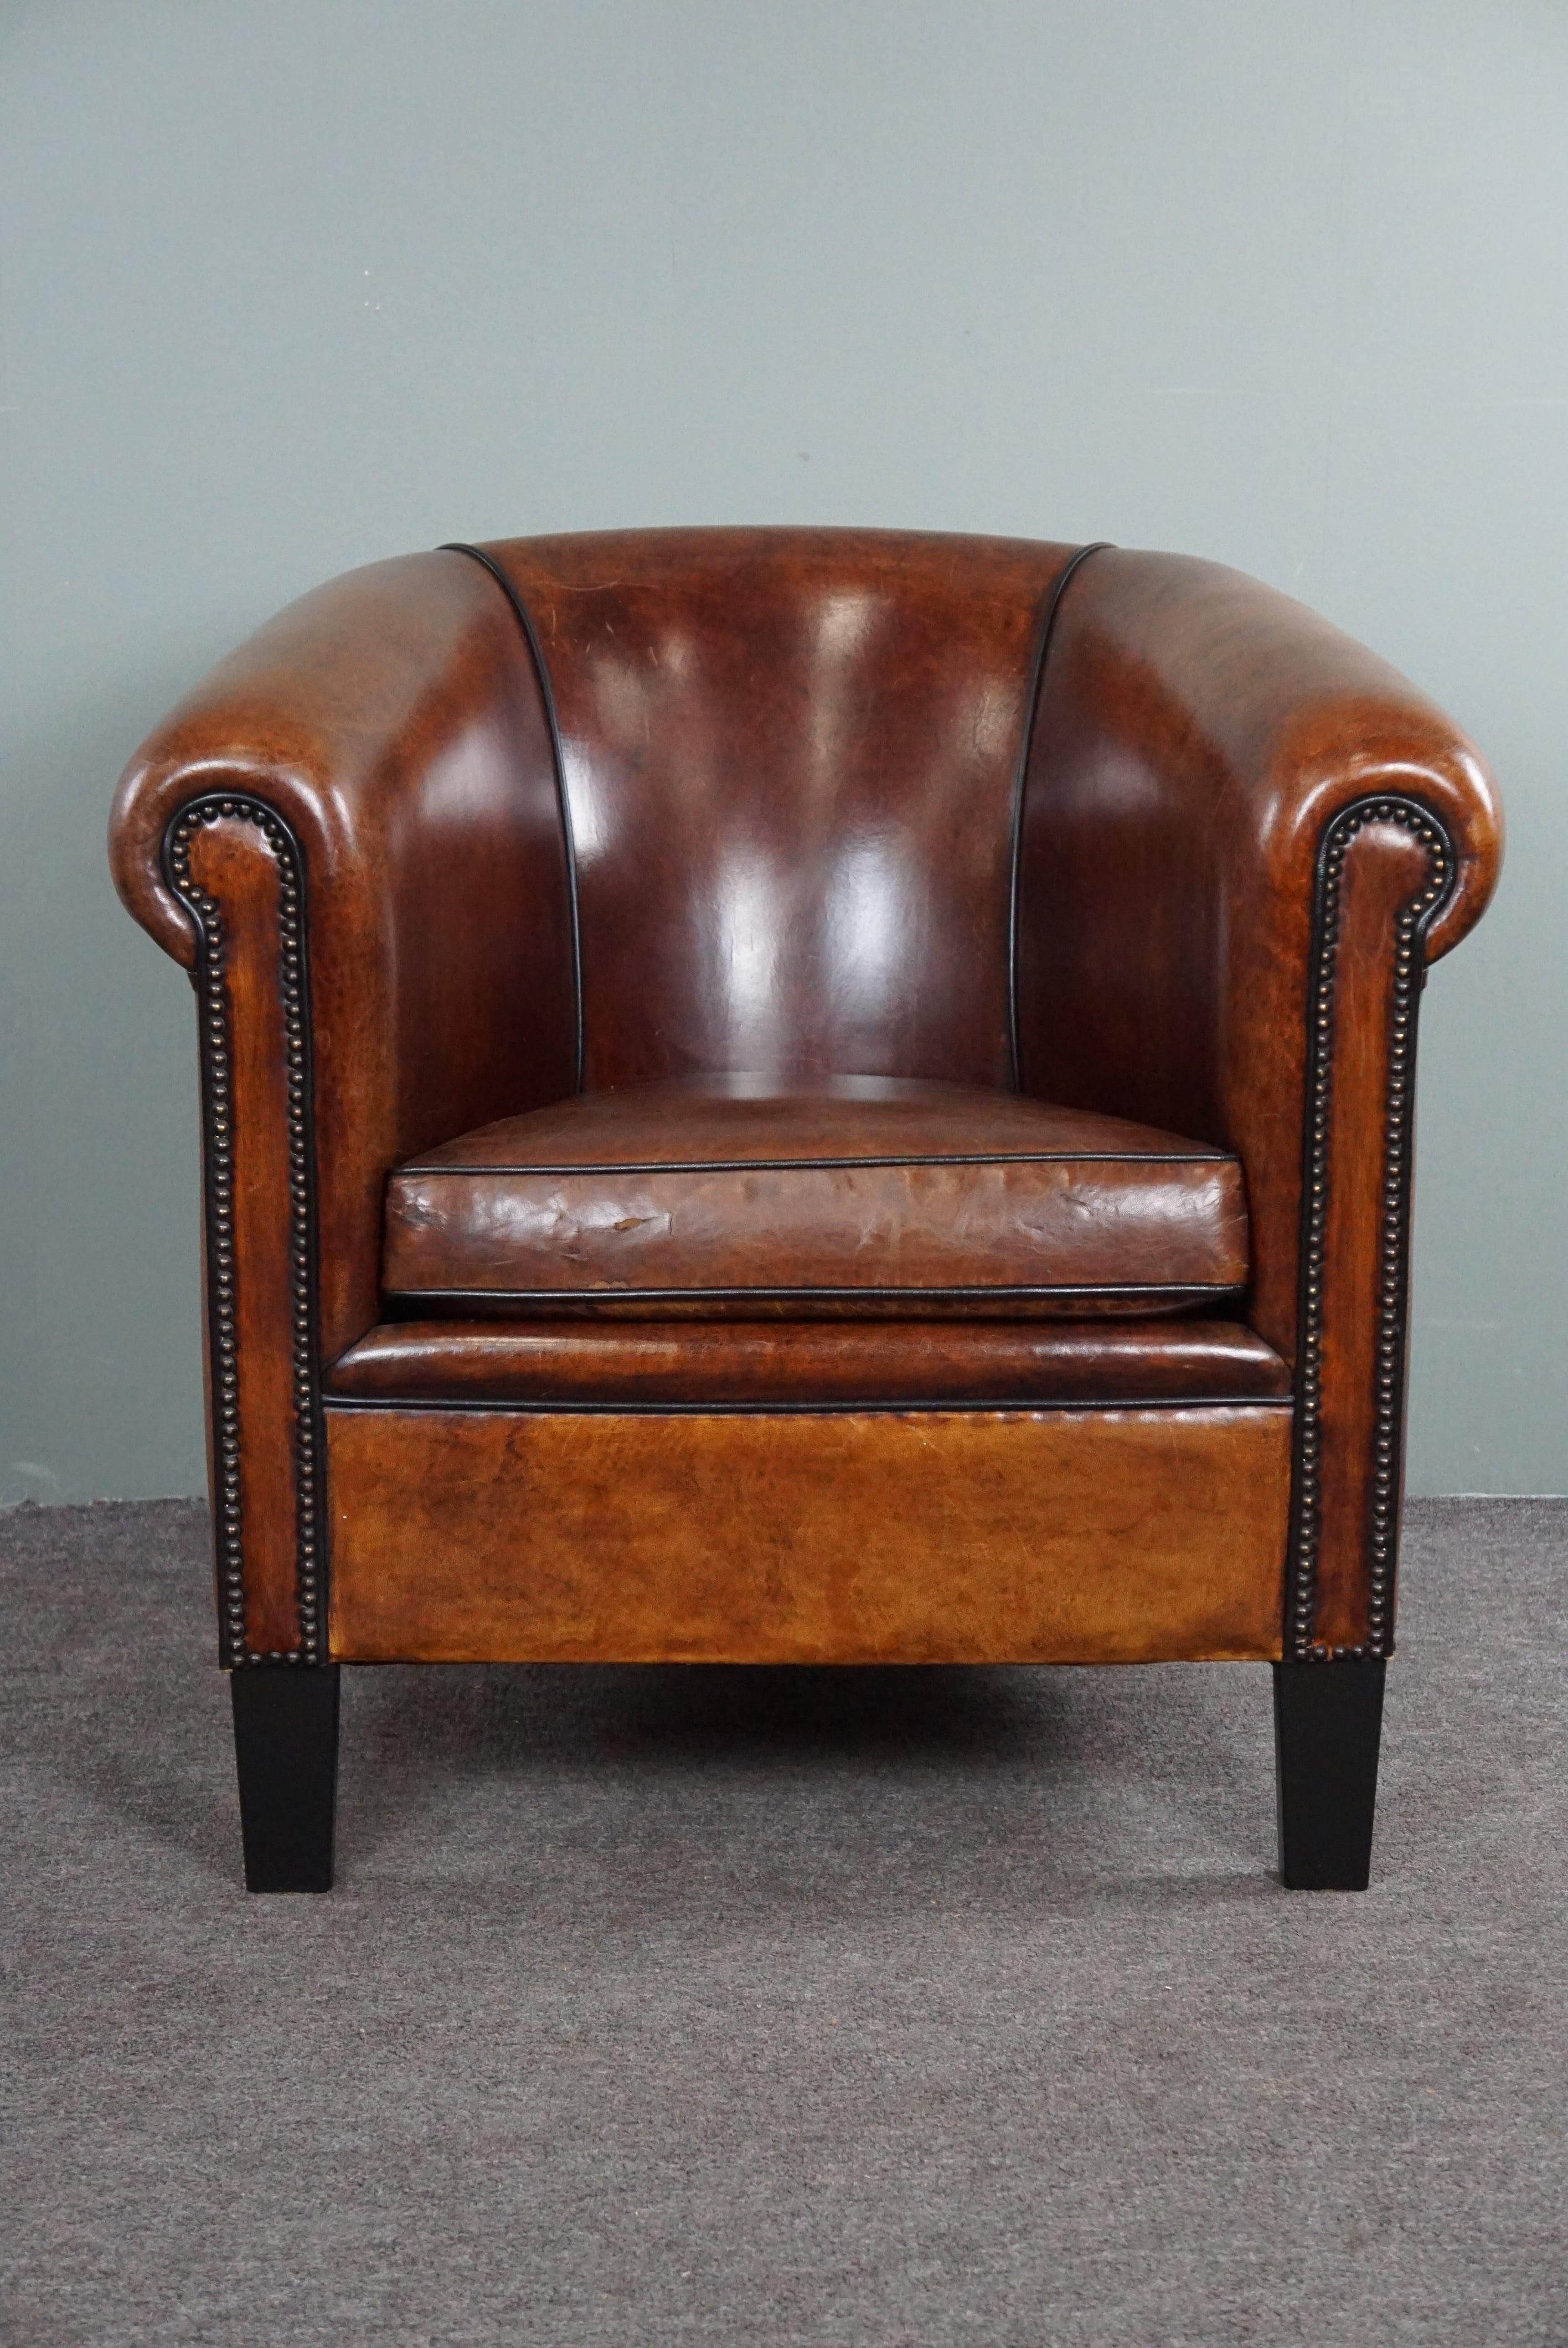 Offered is this warm-colored sheep leather club chair made with only top materials.

This sheep leather club chair is elegant because of the black piping in combination with the decorative nails and the amazing color. In our opinion, the seating